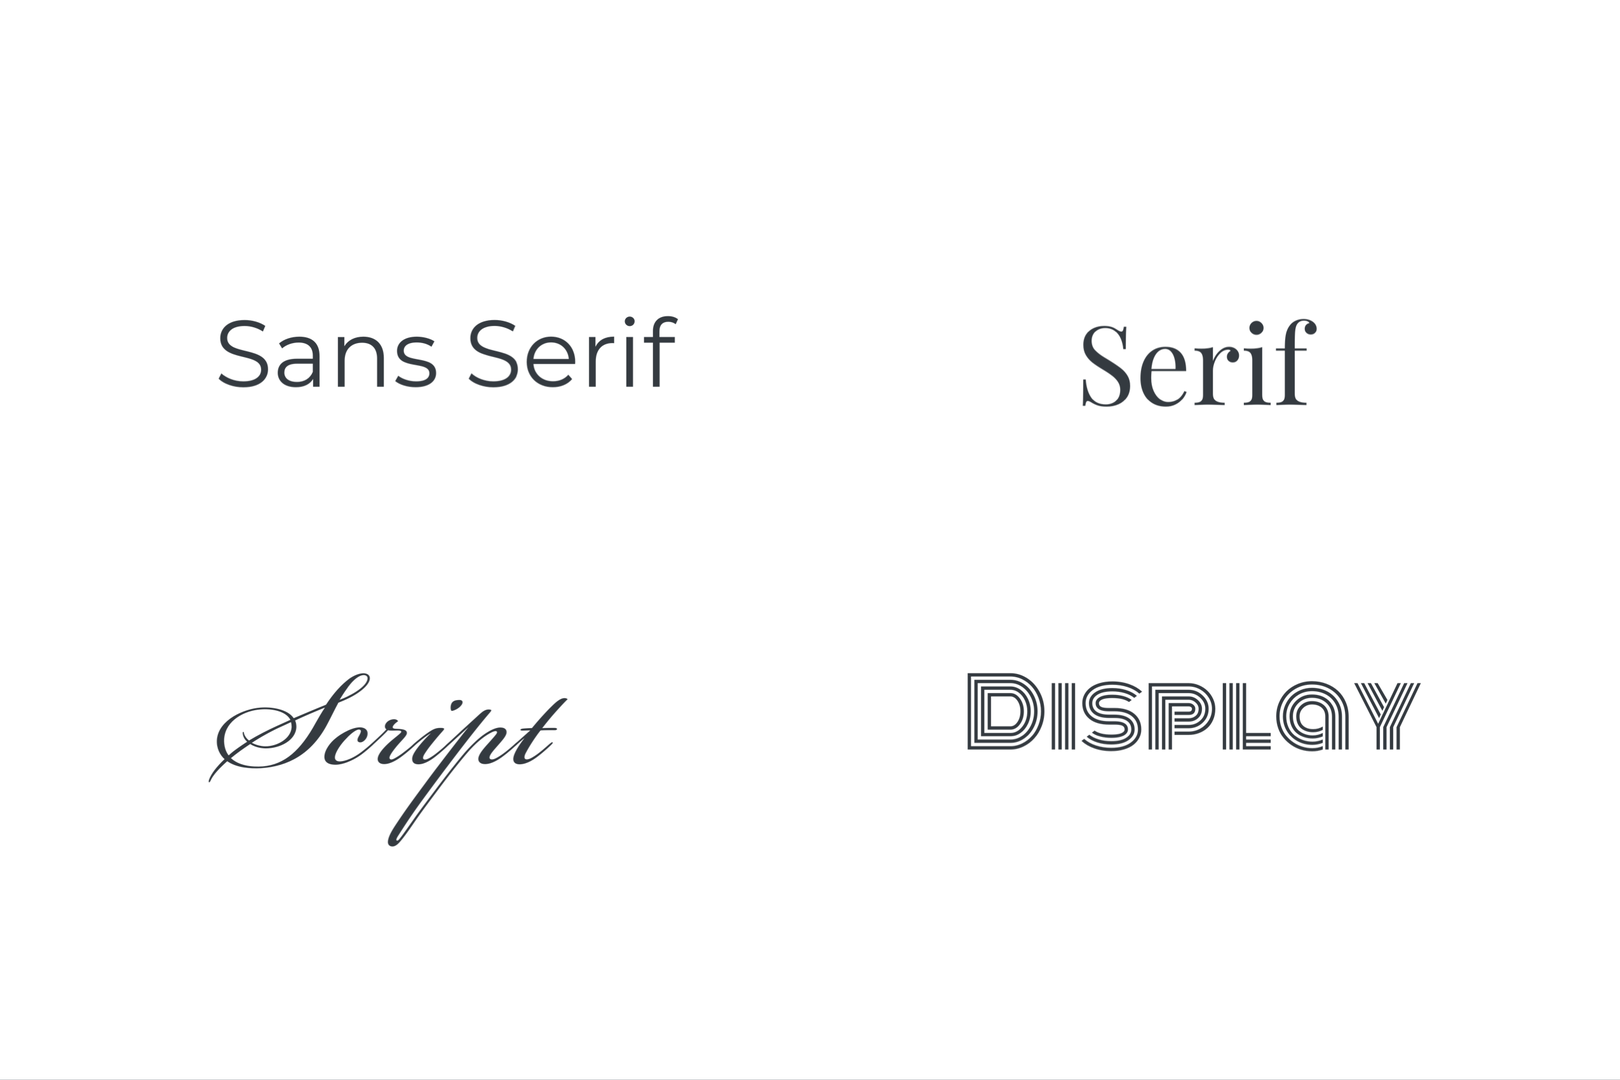 Choosing the right font for your logo